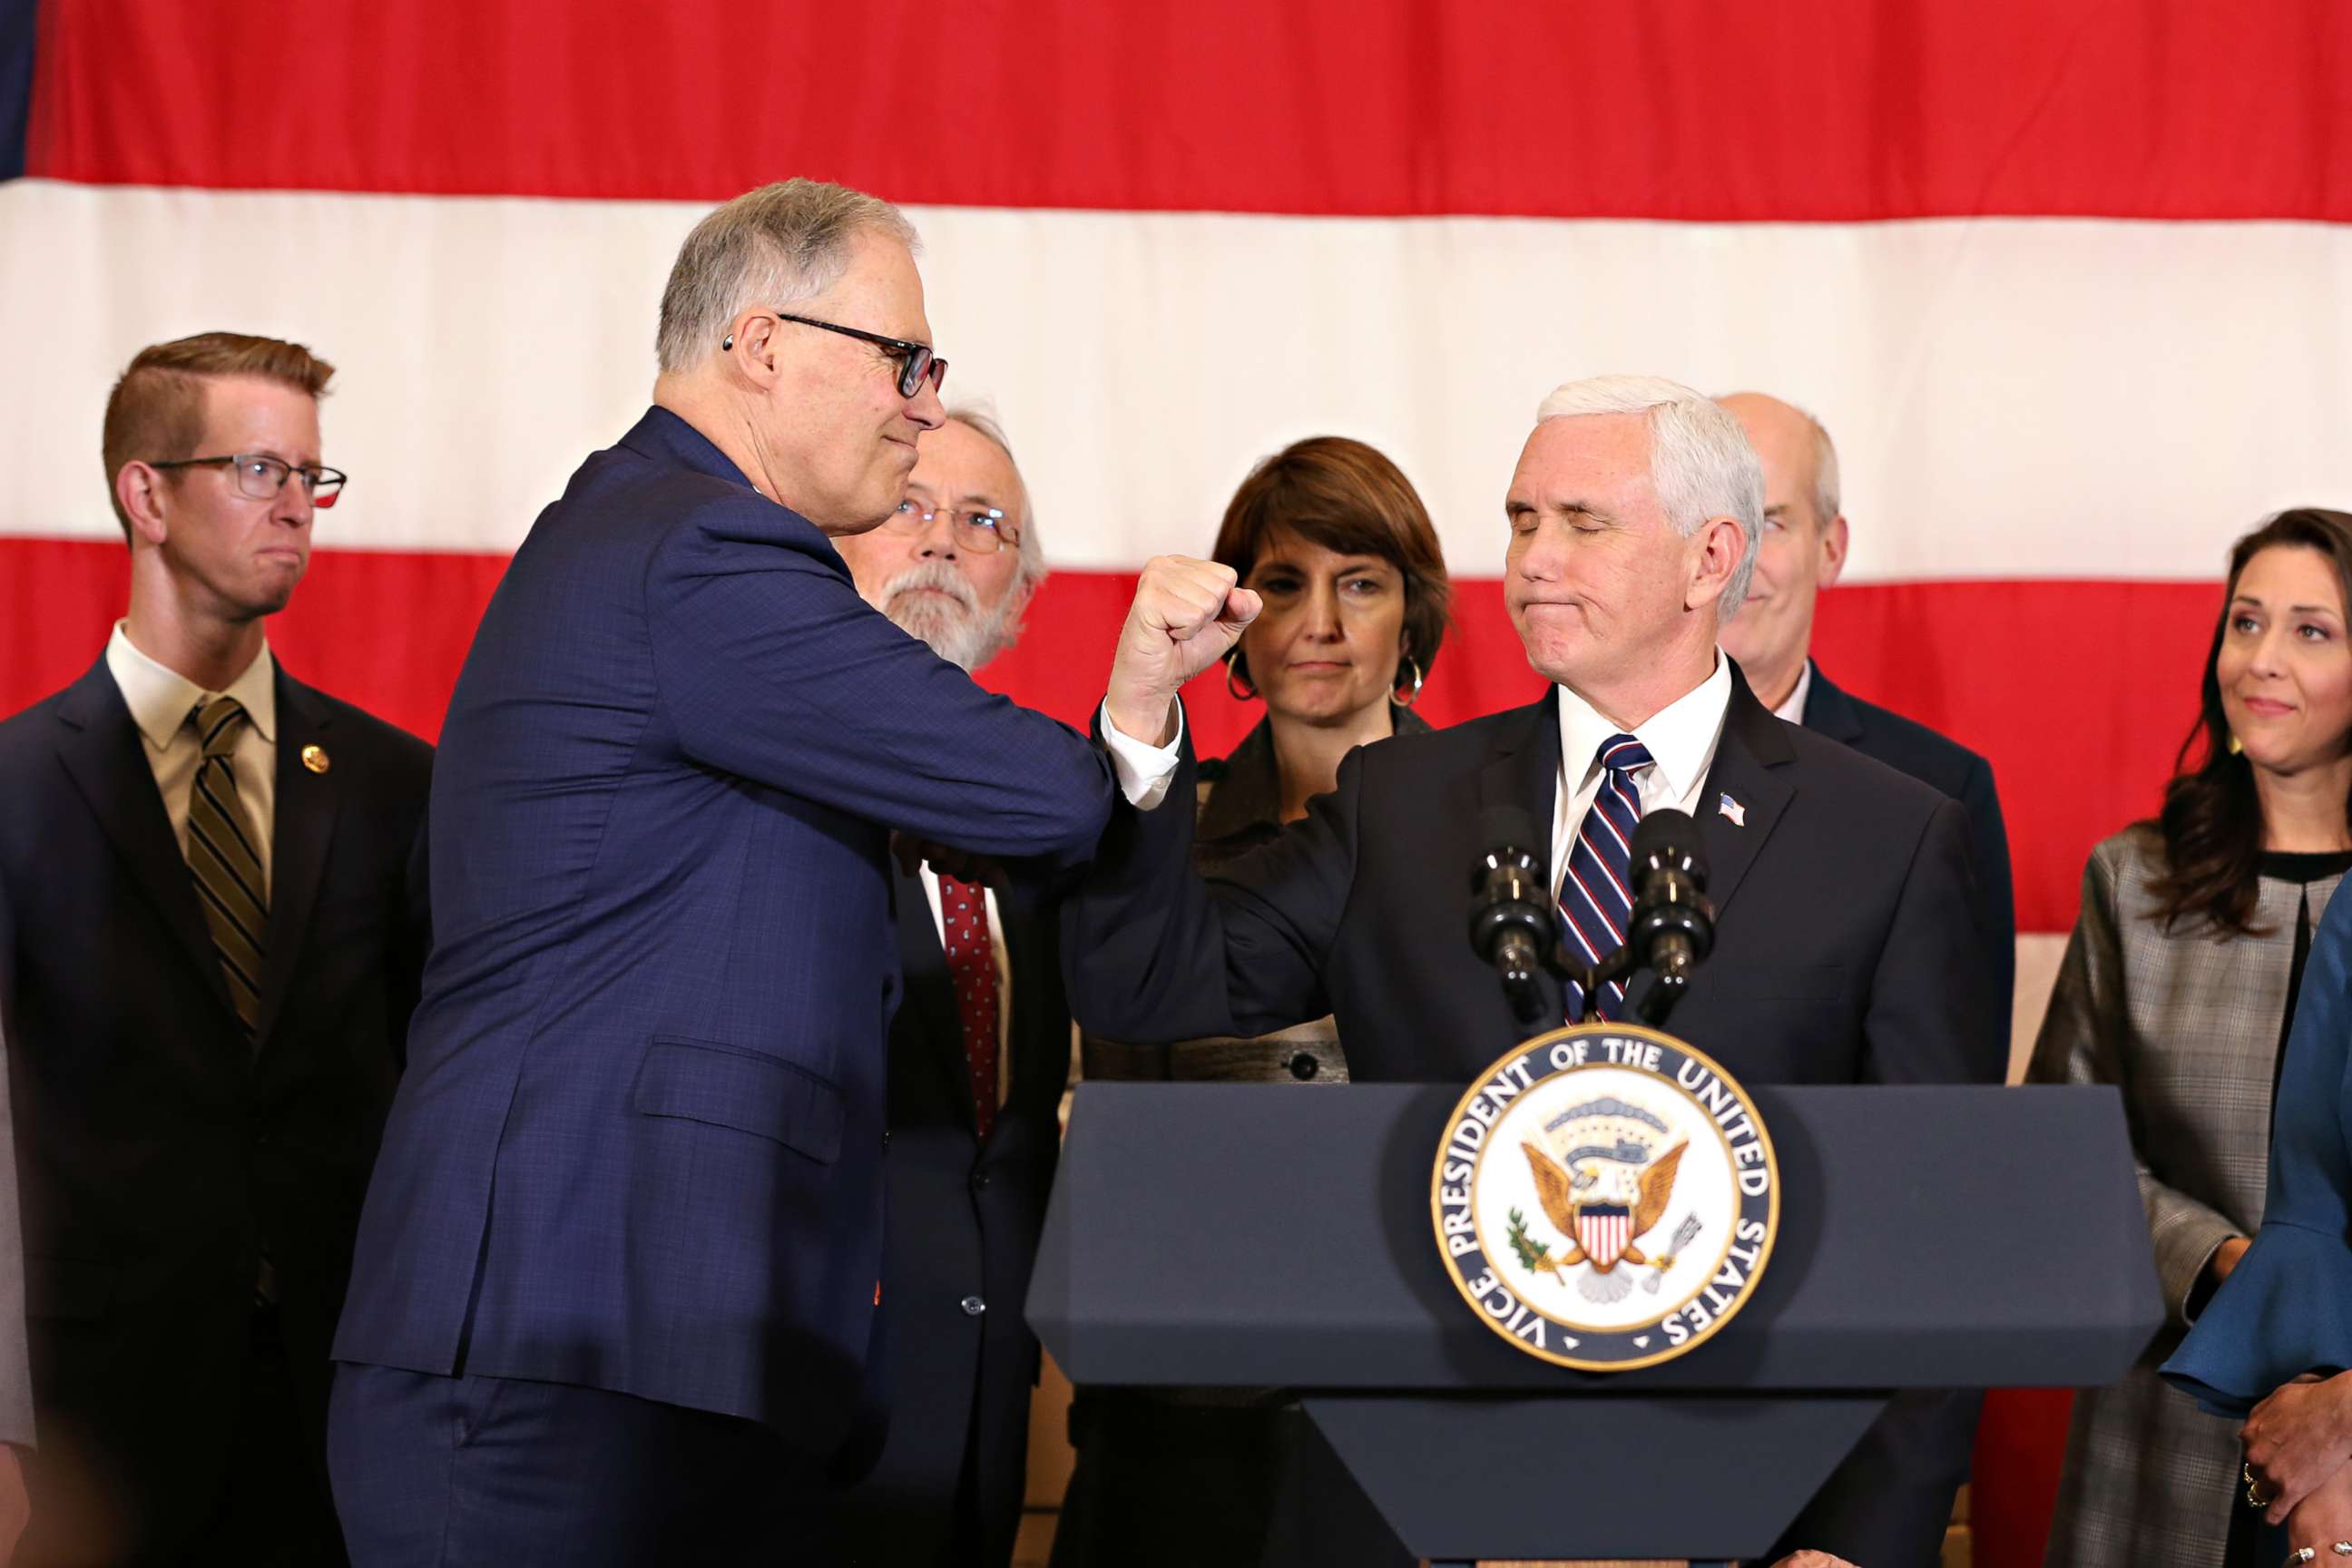 PHOTO: Washington State Governor Jay Inslee uses his elbow to greet Vice President Mike Pence greets during a press conference on March 5, 2020 at Camp Murray, adjacent to Joint Base Lewis-McChord, Washington.